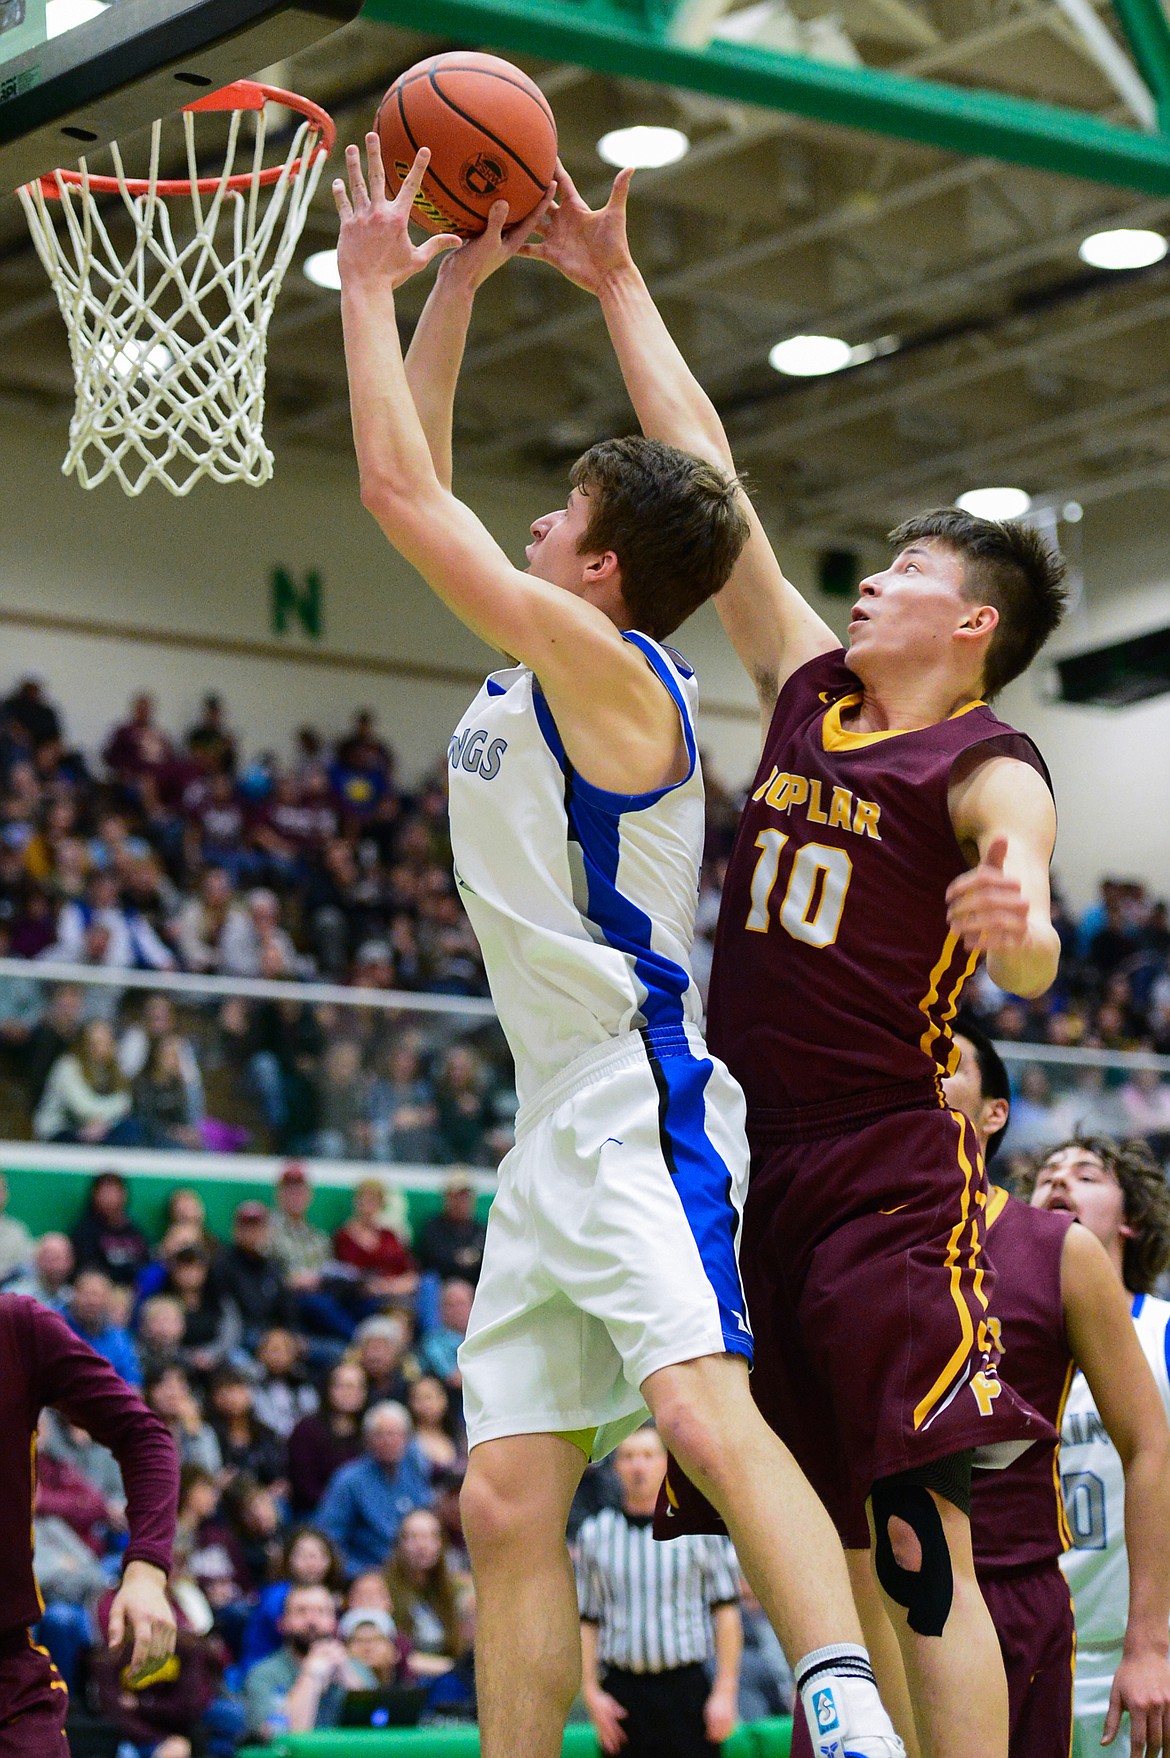 Bigfork's Colton Reichenbach (3) drives to the hoop against Poplar's Wynn Main (10) in the State Class B Boys' Basketball Tournament at the Belgrade Special Events Center in Belgrade on Thursday. (Casey Kreider/Daily Inter Lake)